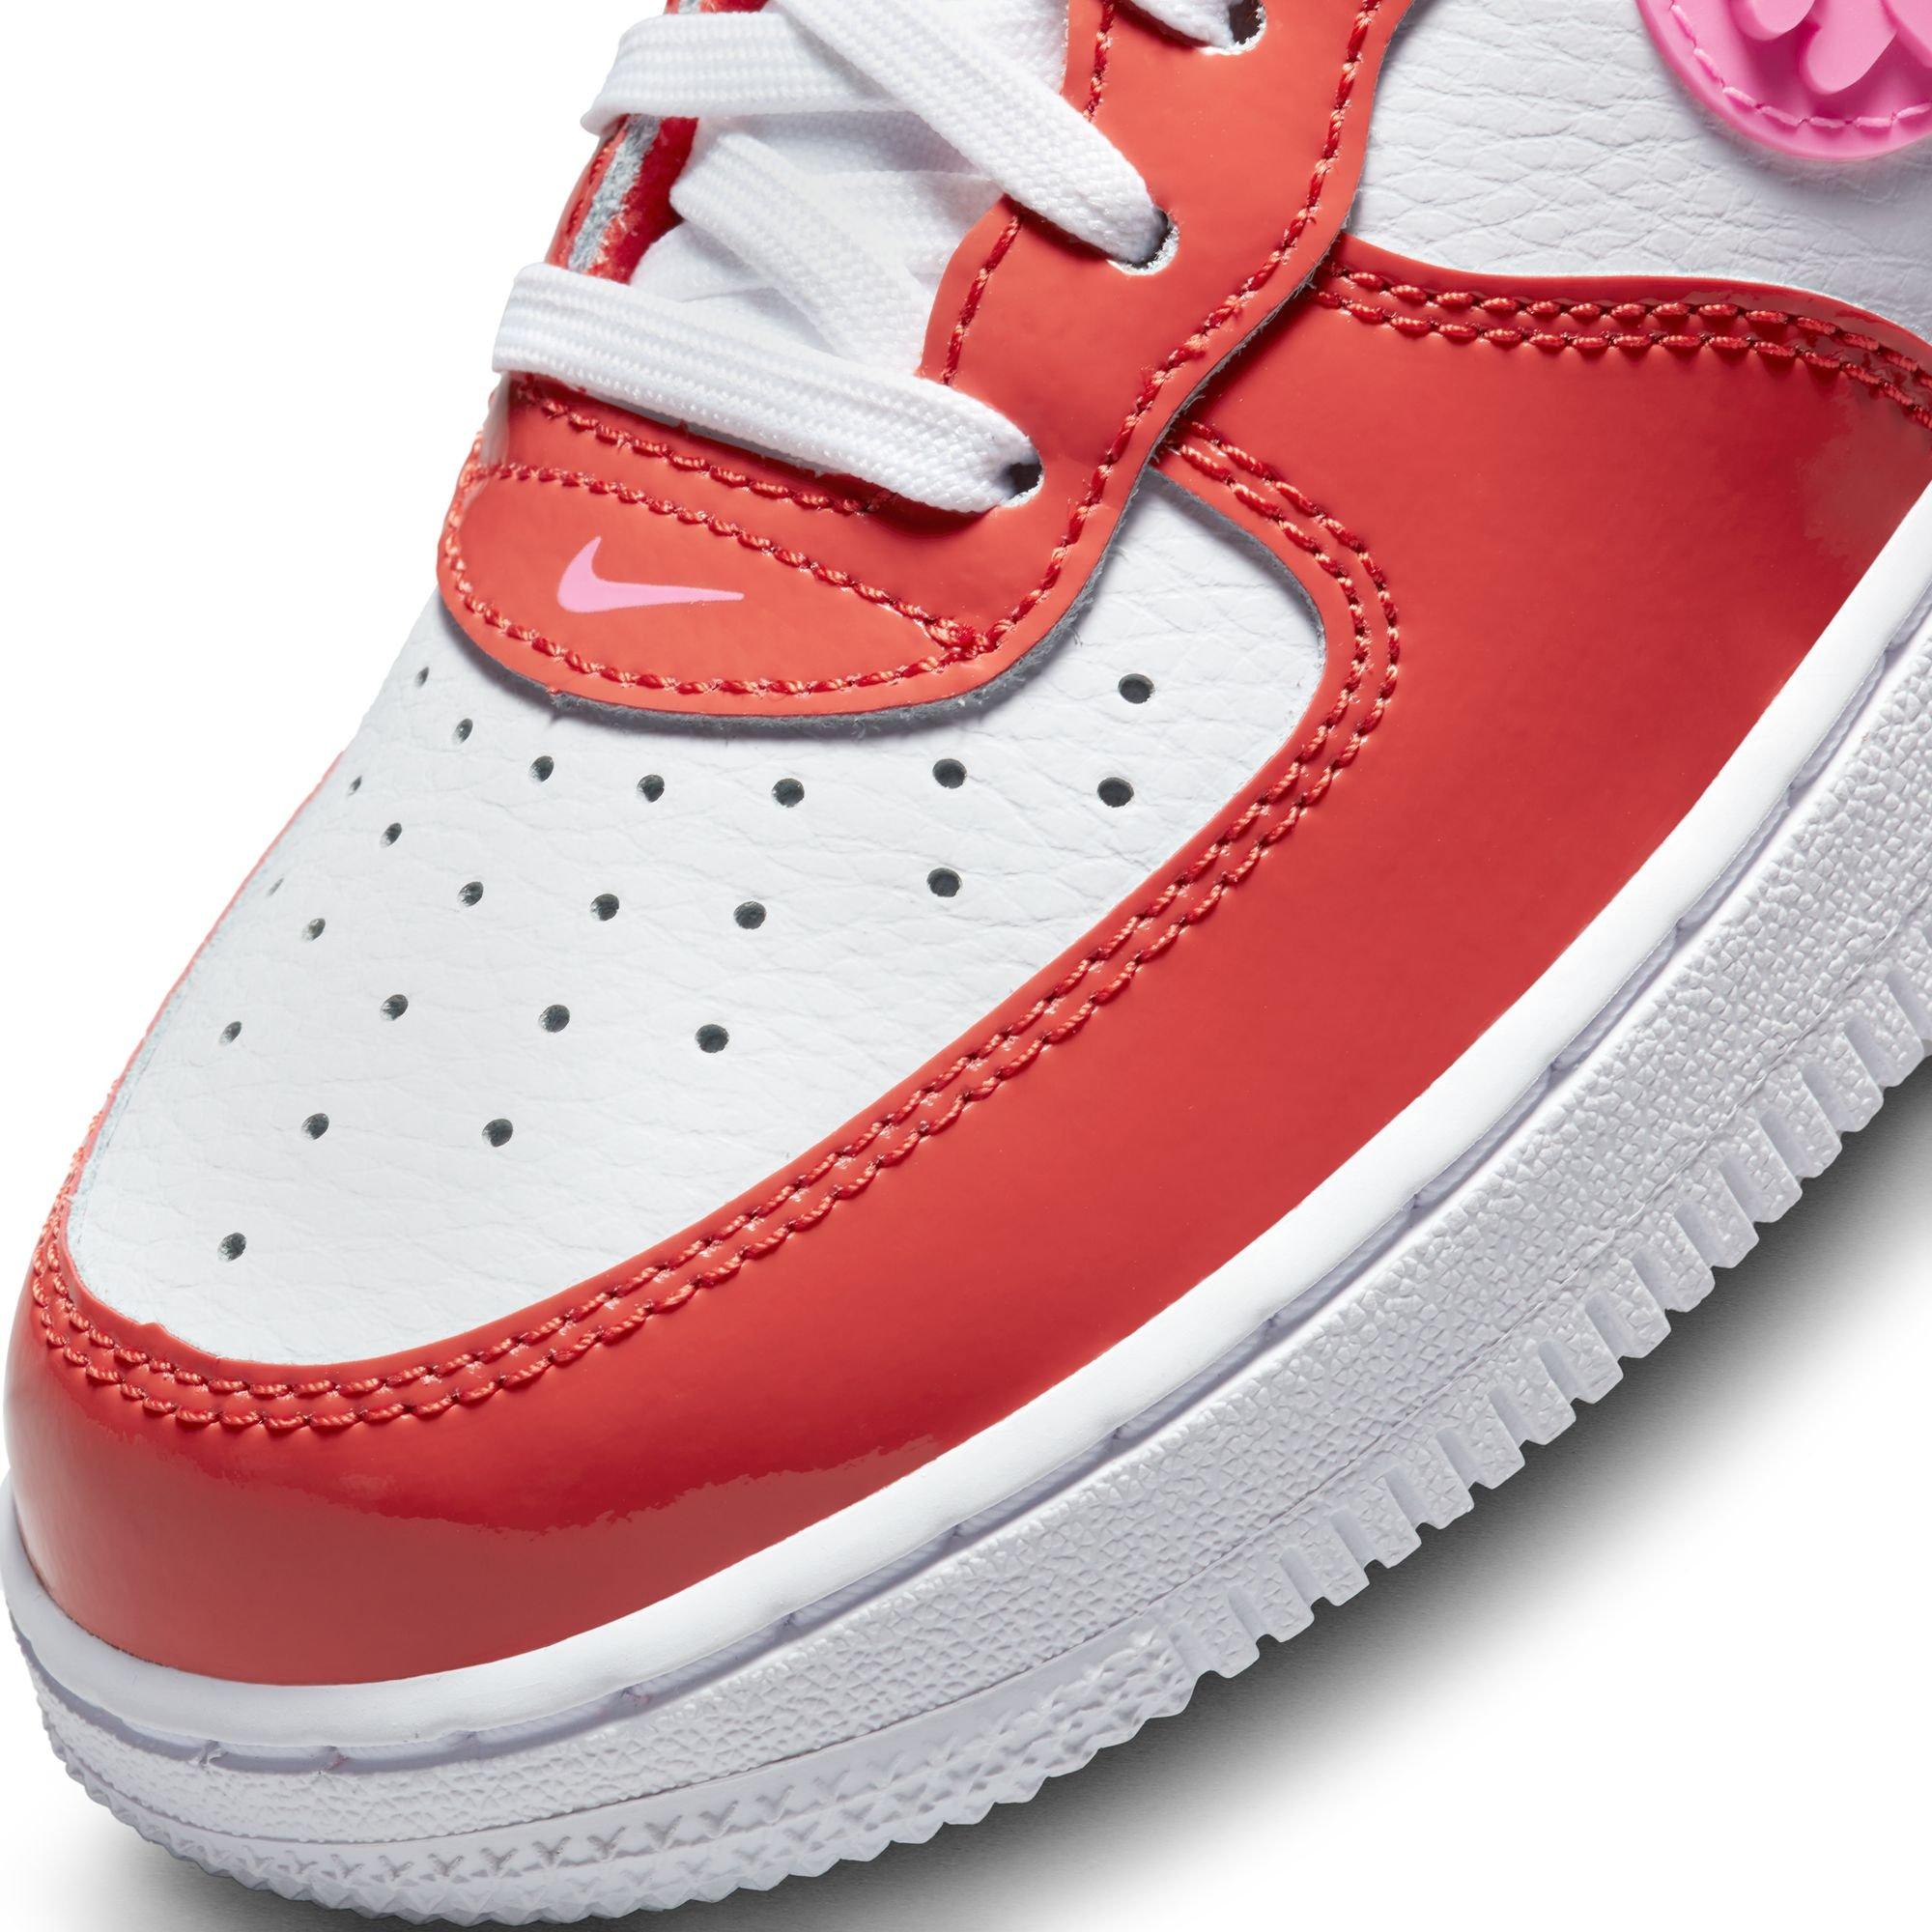 Nike Air Force 1 LV8 Prechool Lifestyle Shoes White Pink DX3728